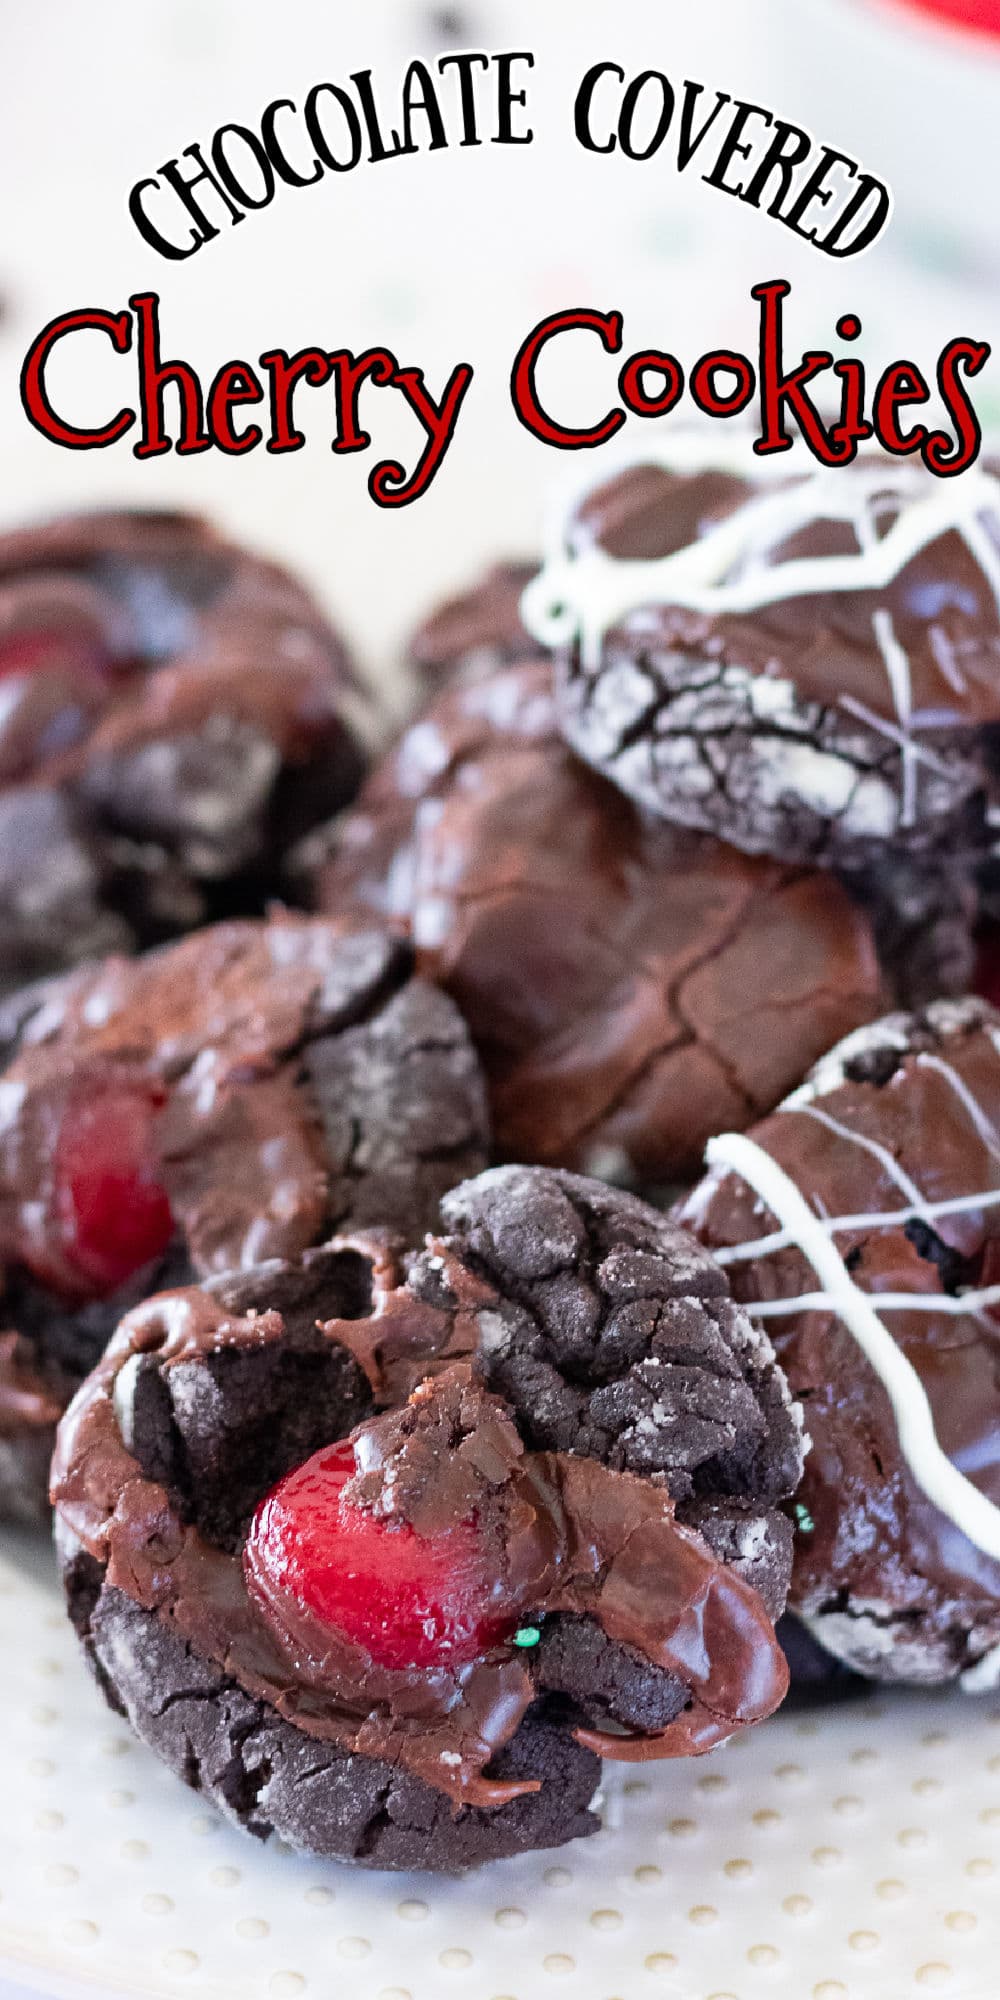 Chocolate Covered Cherry Cookies | Restless Chipotle